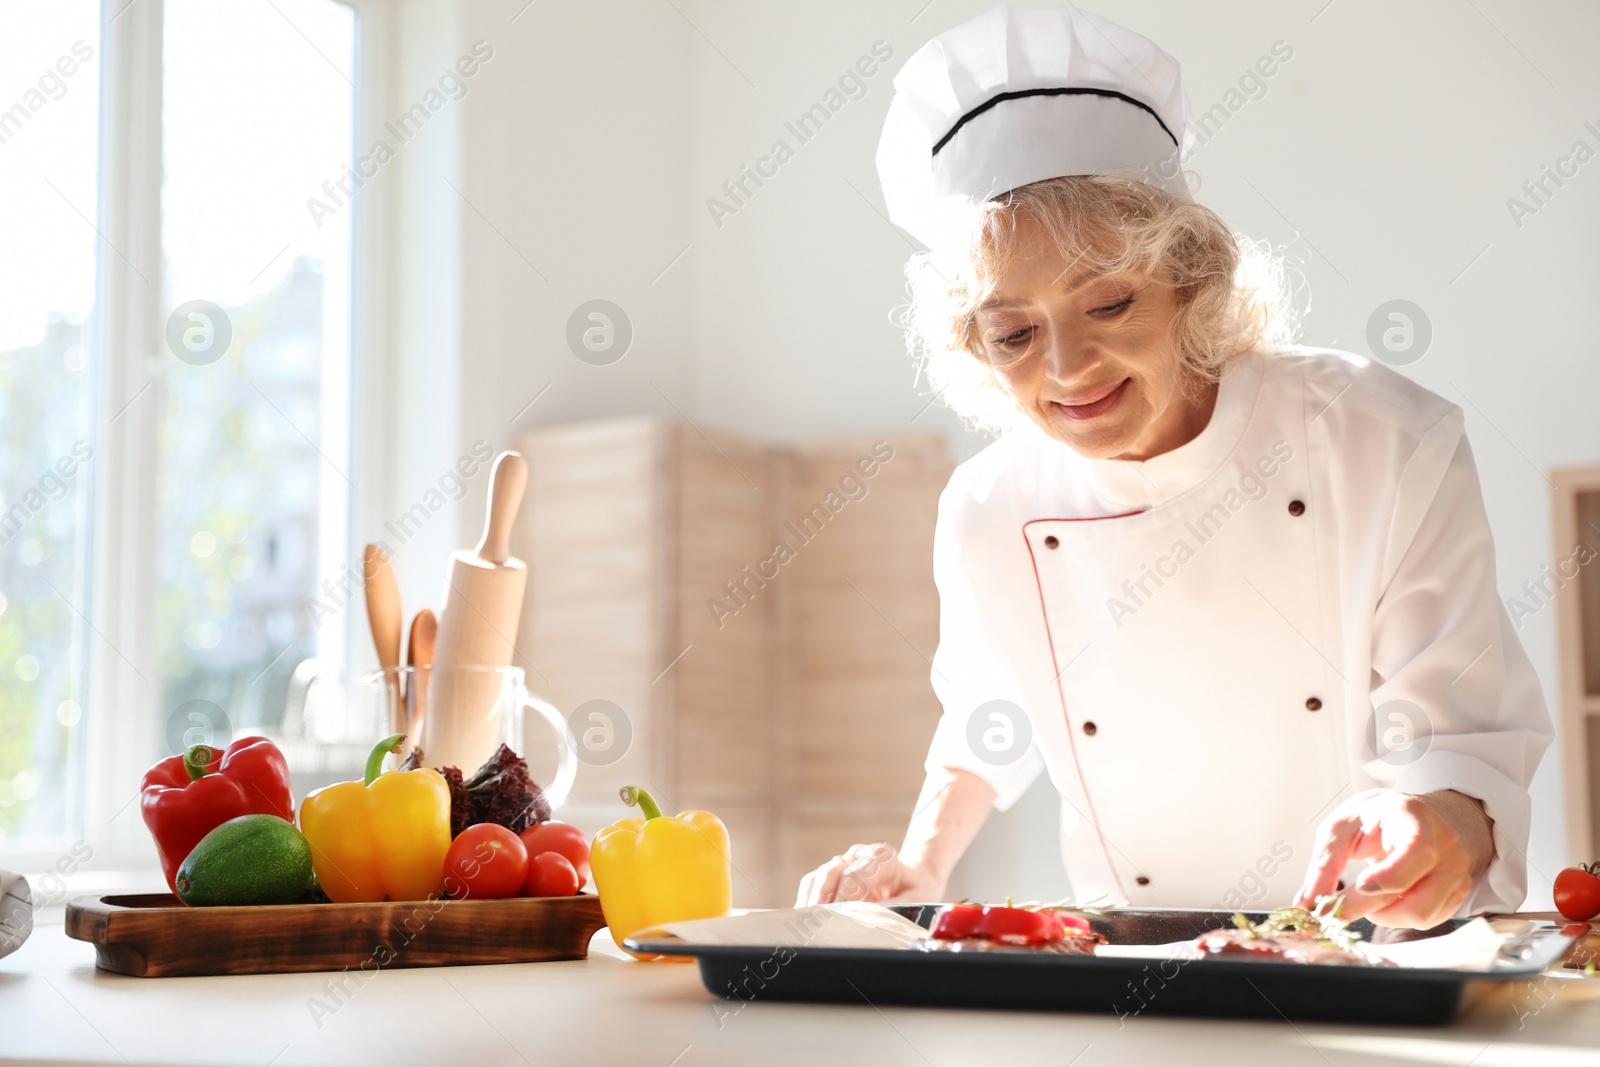 Photo of Professional female chef preparing meat in kitchen